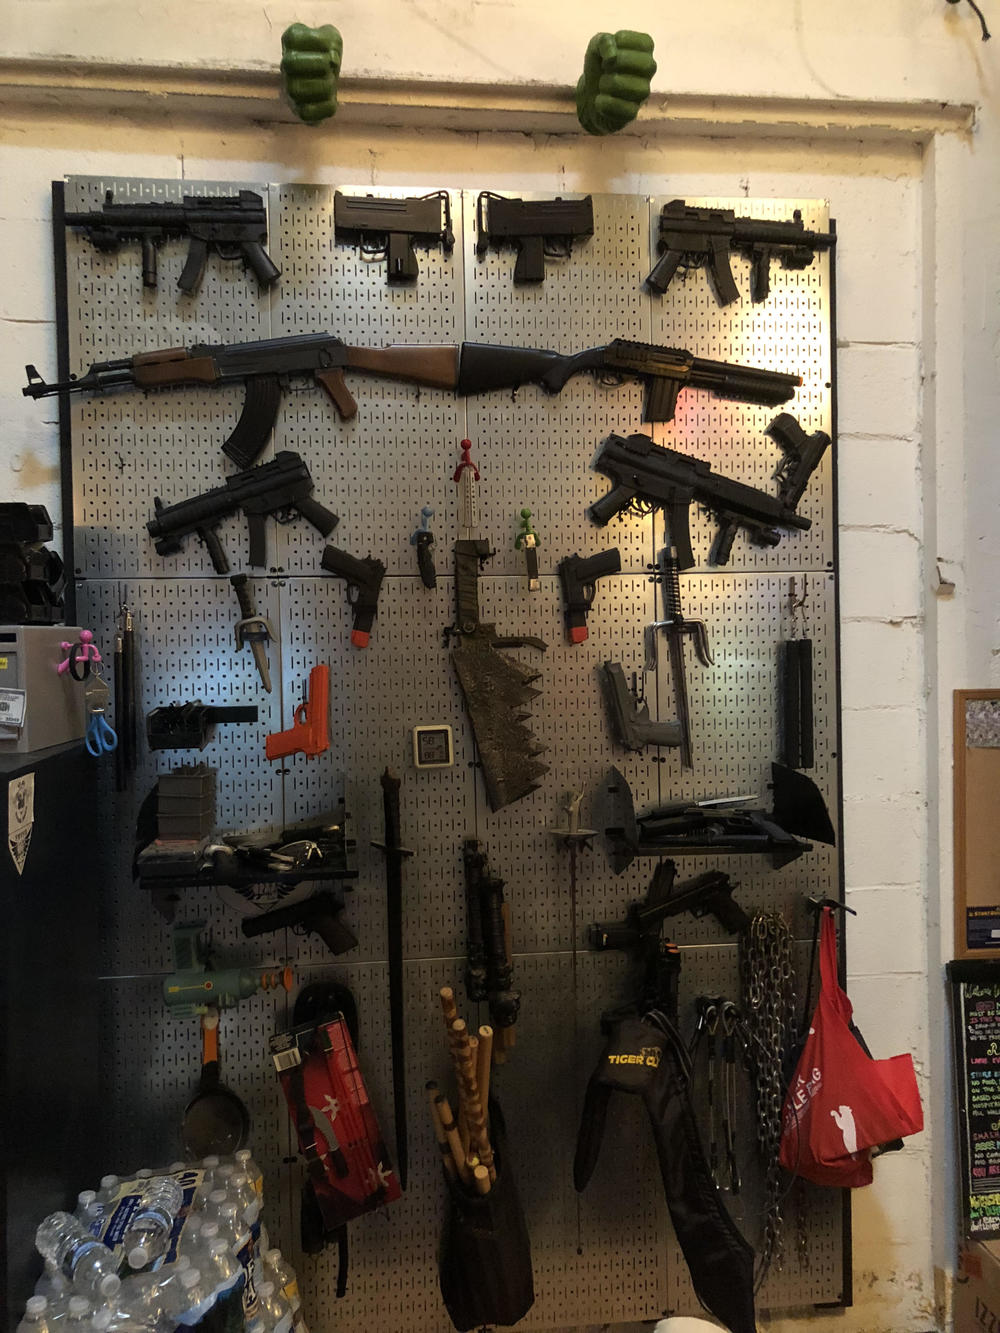 In Elizabeth's stunt studio in Atlanta, there is an armory on one of the walls with a wide variety of fake weapons.